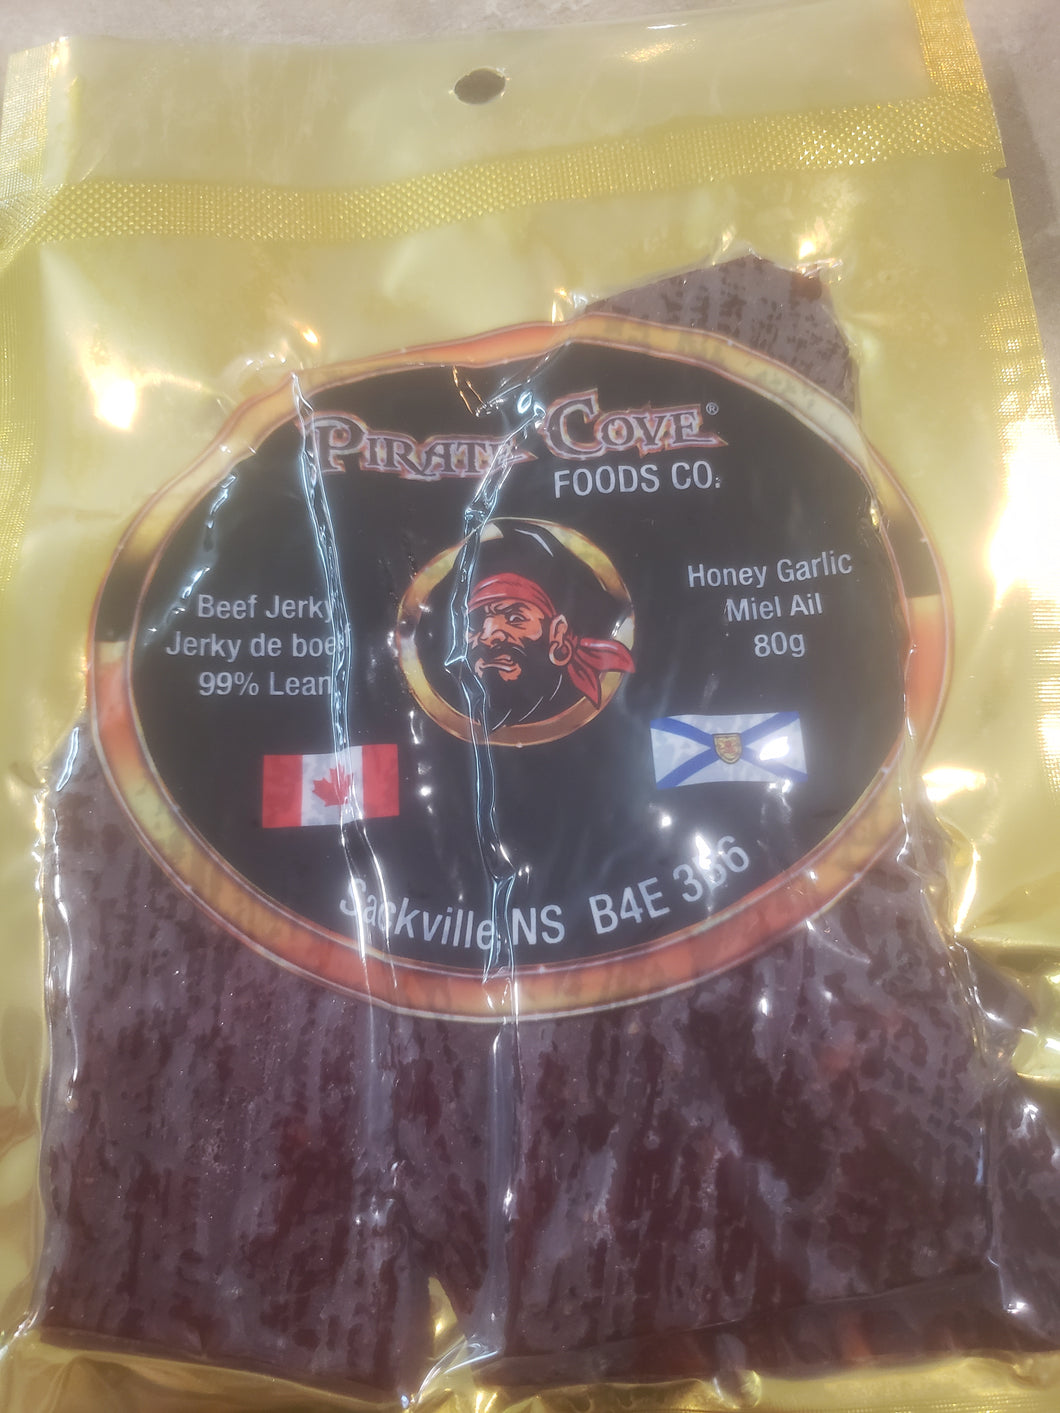 Pirate Cove Beef Jerky